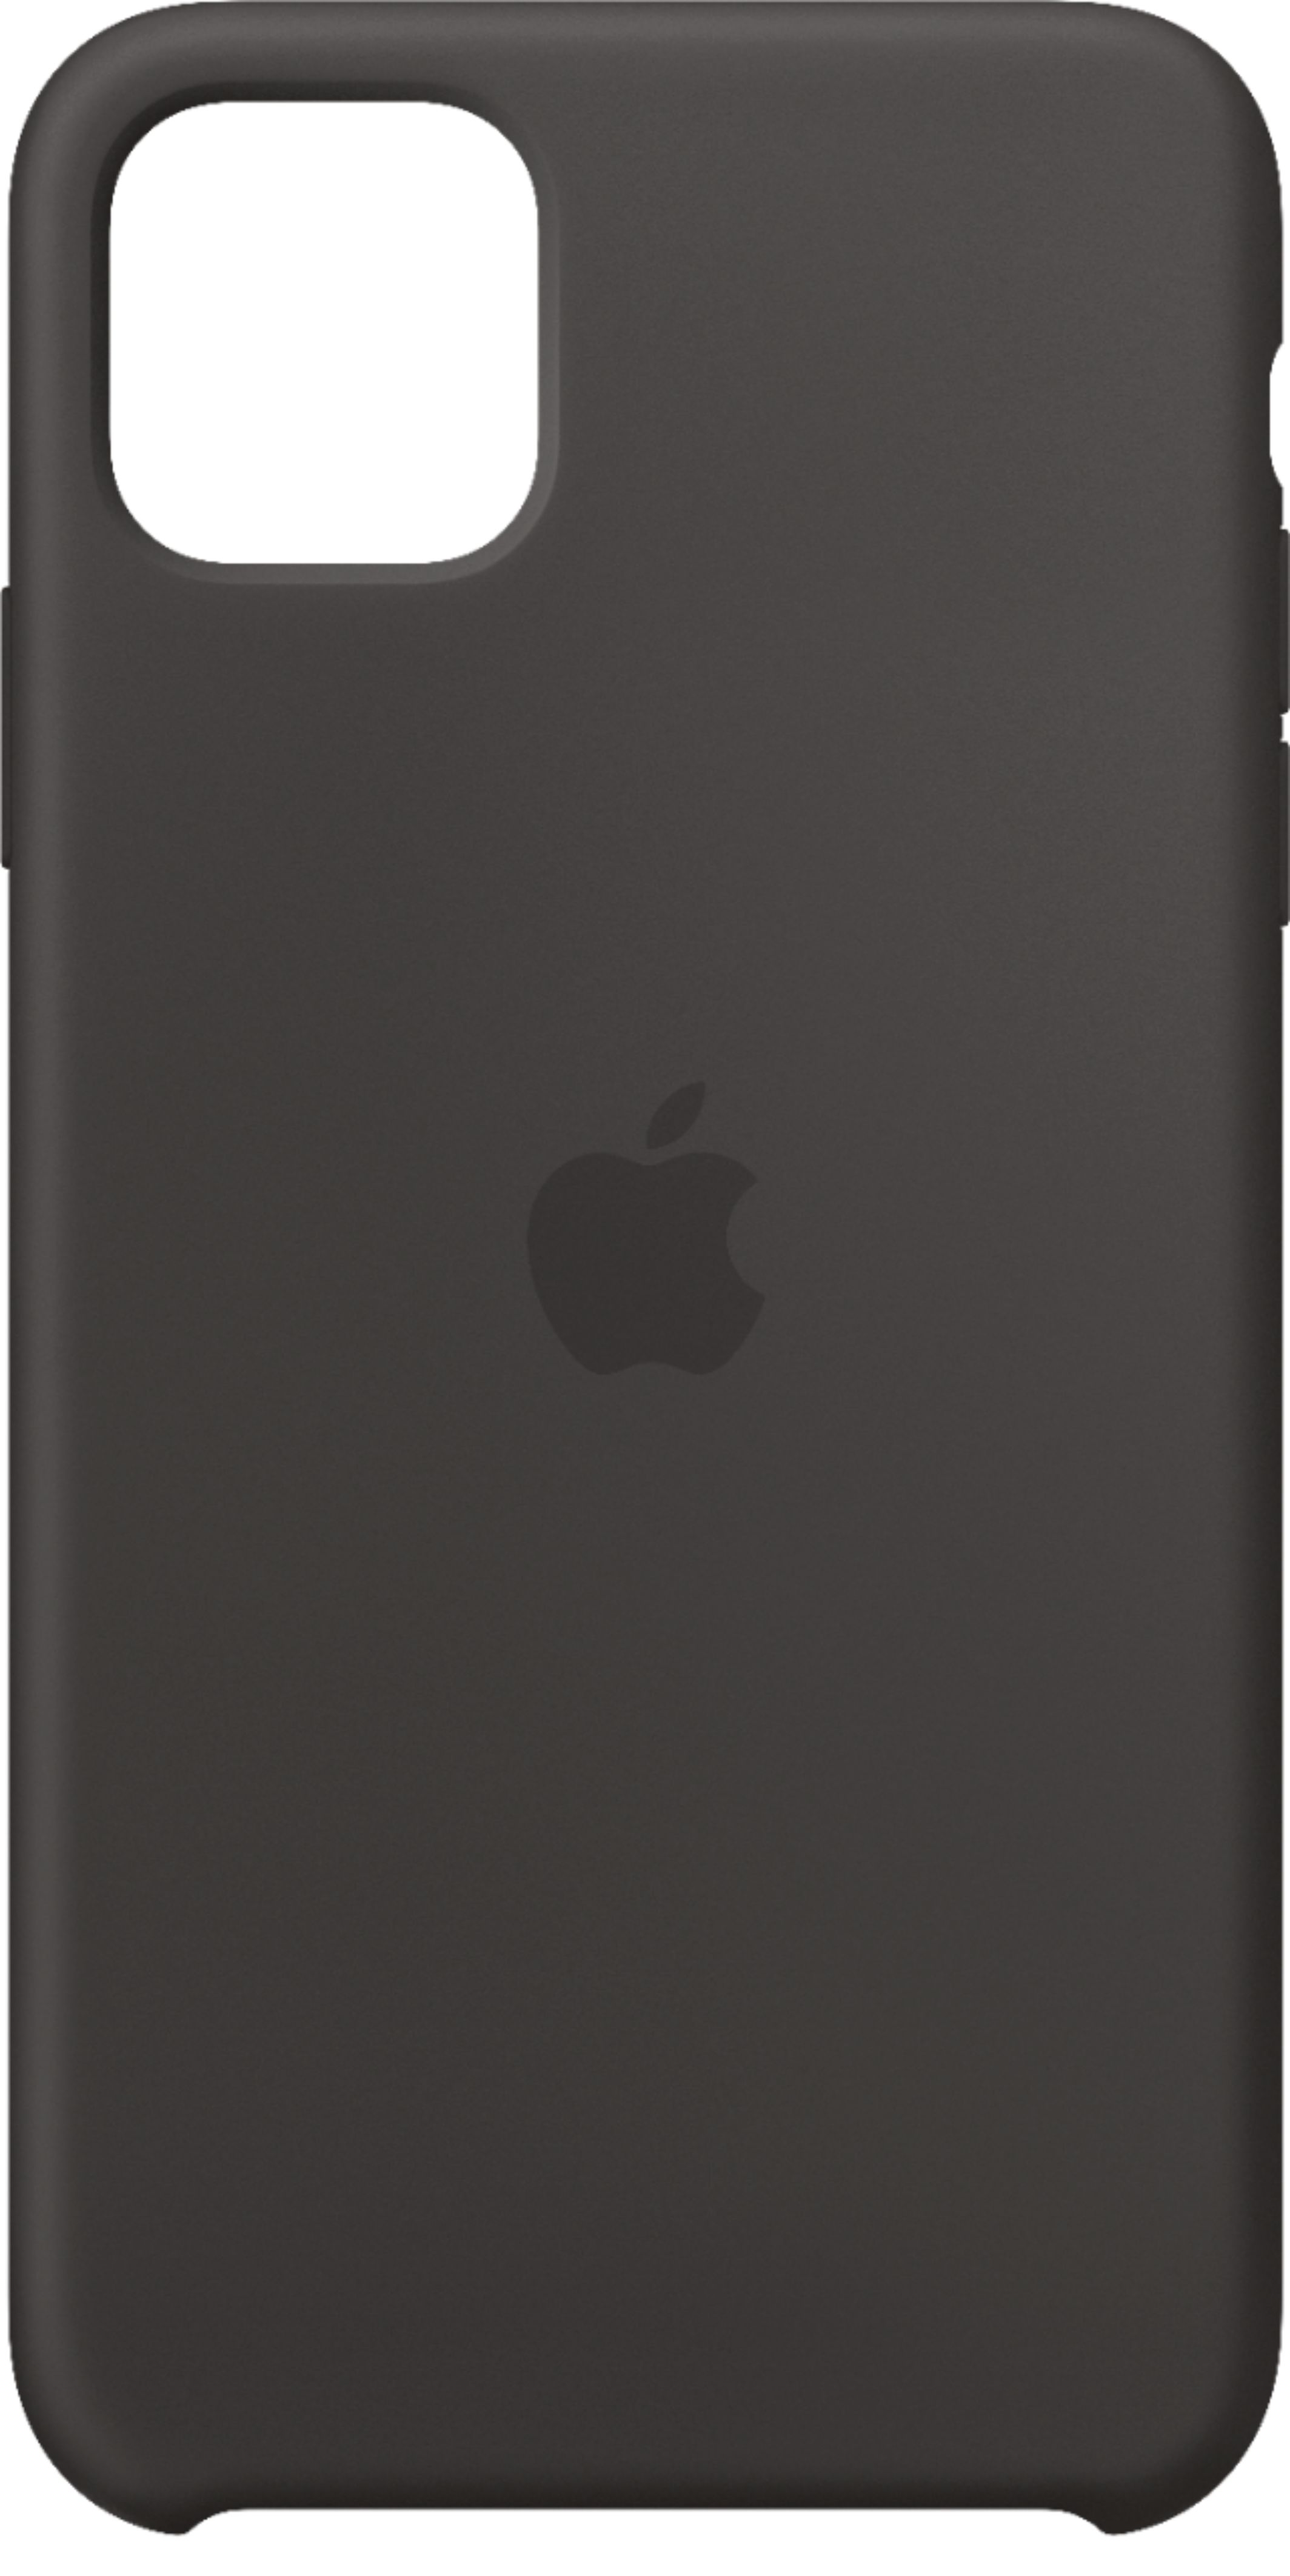 Best Buy Apple Iphone 11 Pro Max Silicone Case Black Mx002zm A